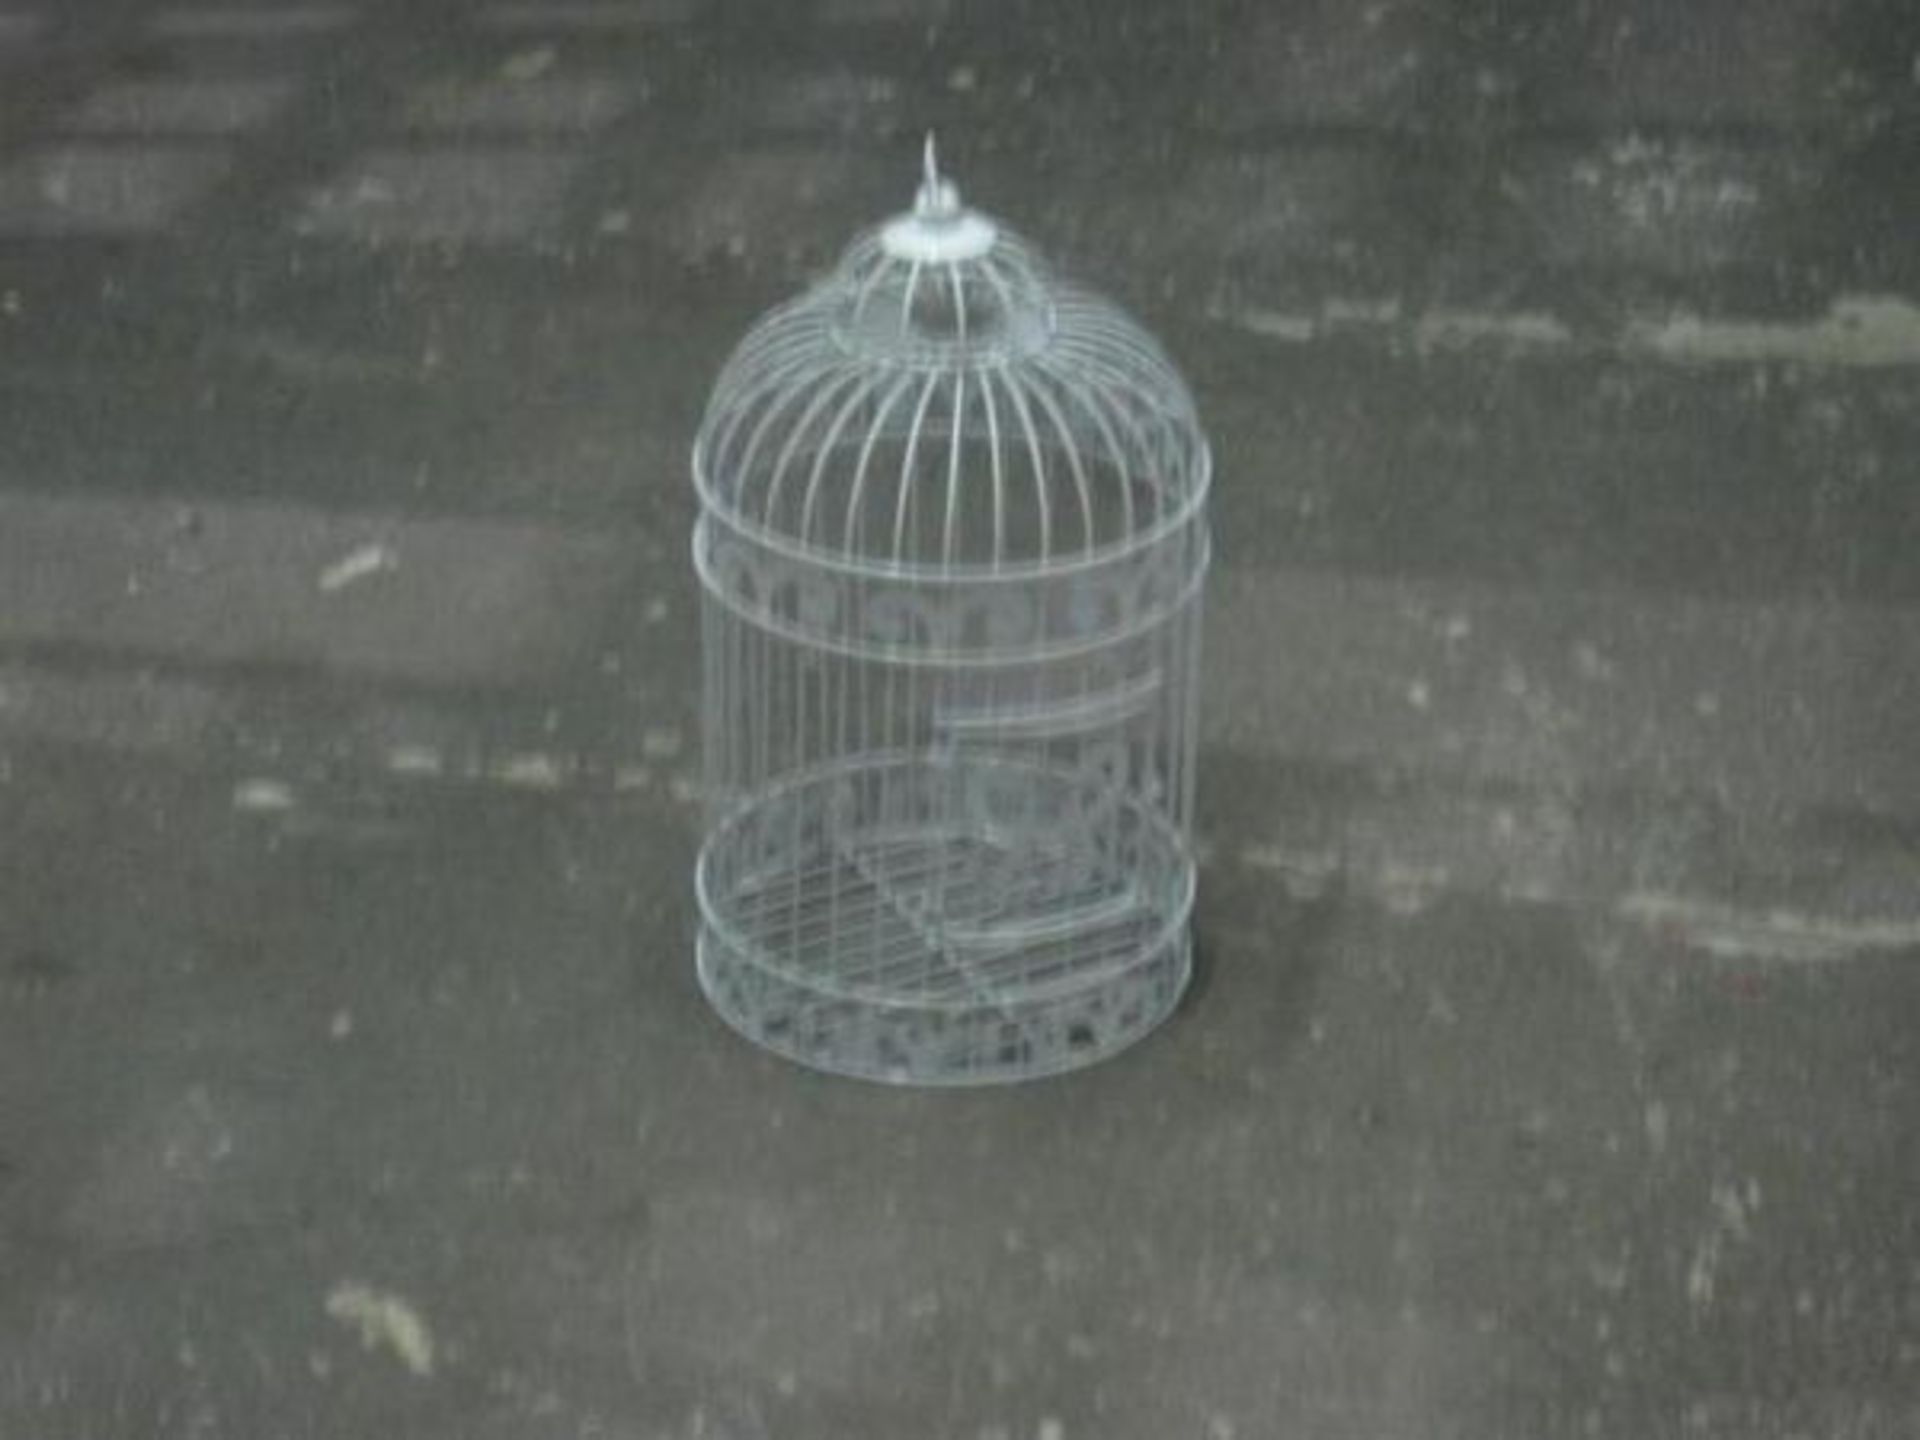 Small Metal Bird Cage